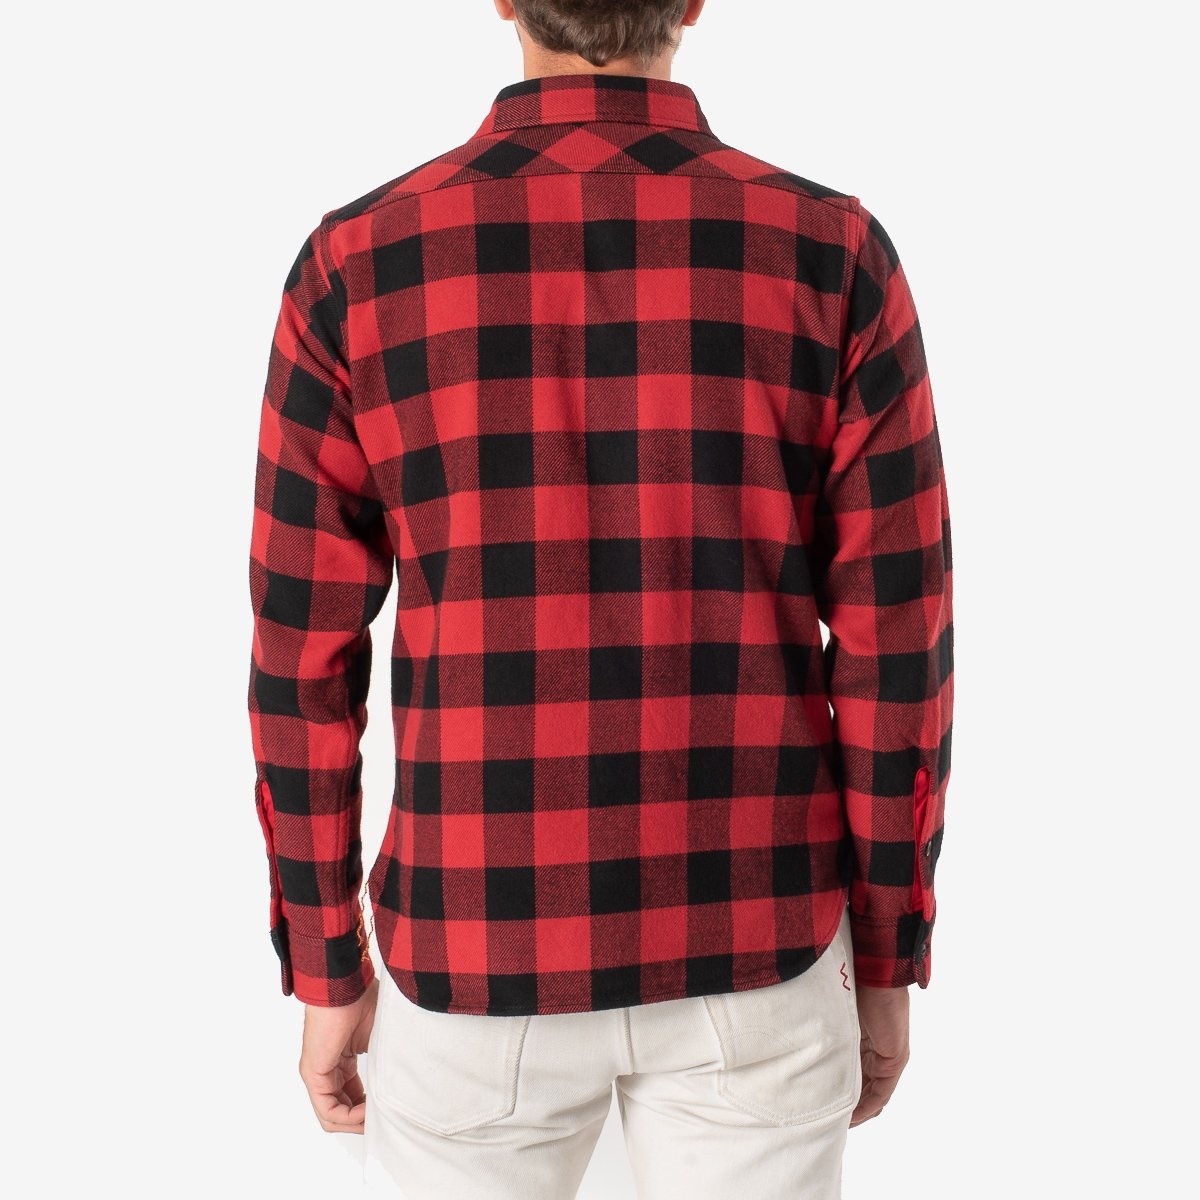 IHSH-244-RED Ultra Heavy Flannel Buffalo Check Work Shirt - Red/Black - 3